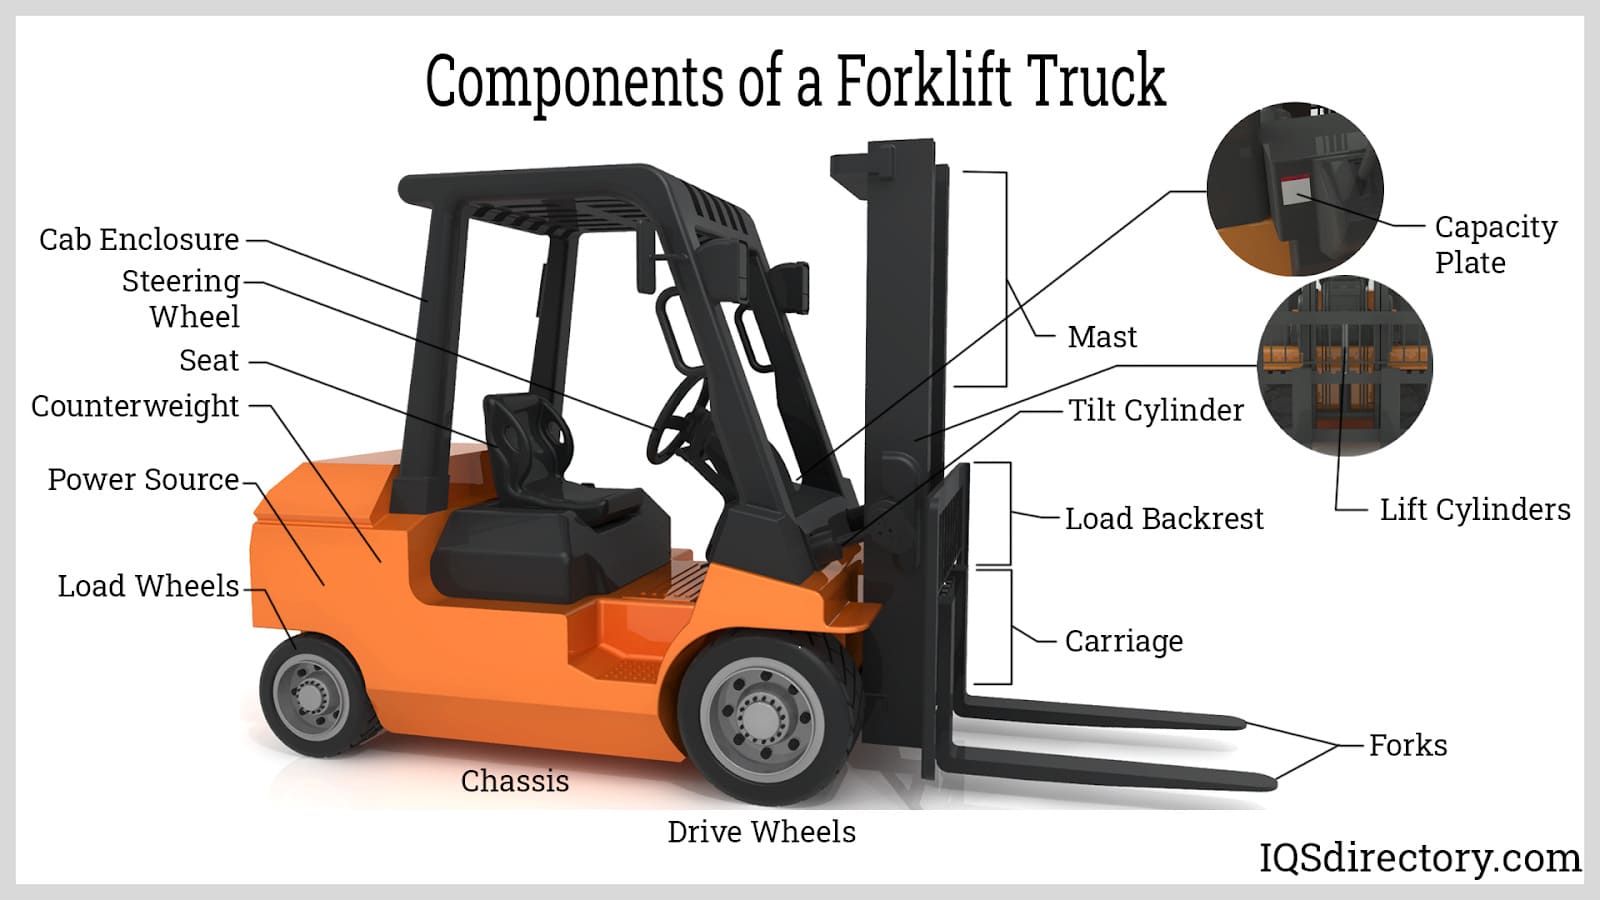 Components of a Forklift Truck